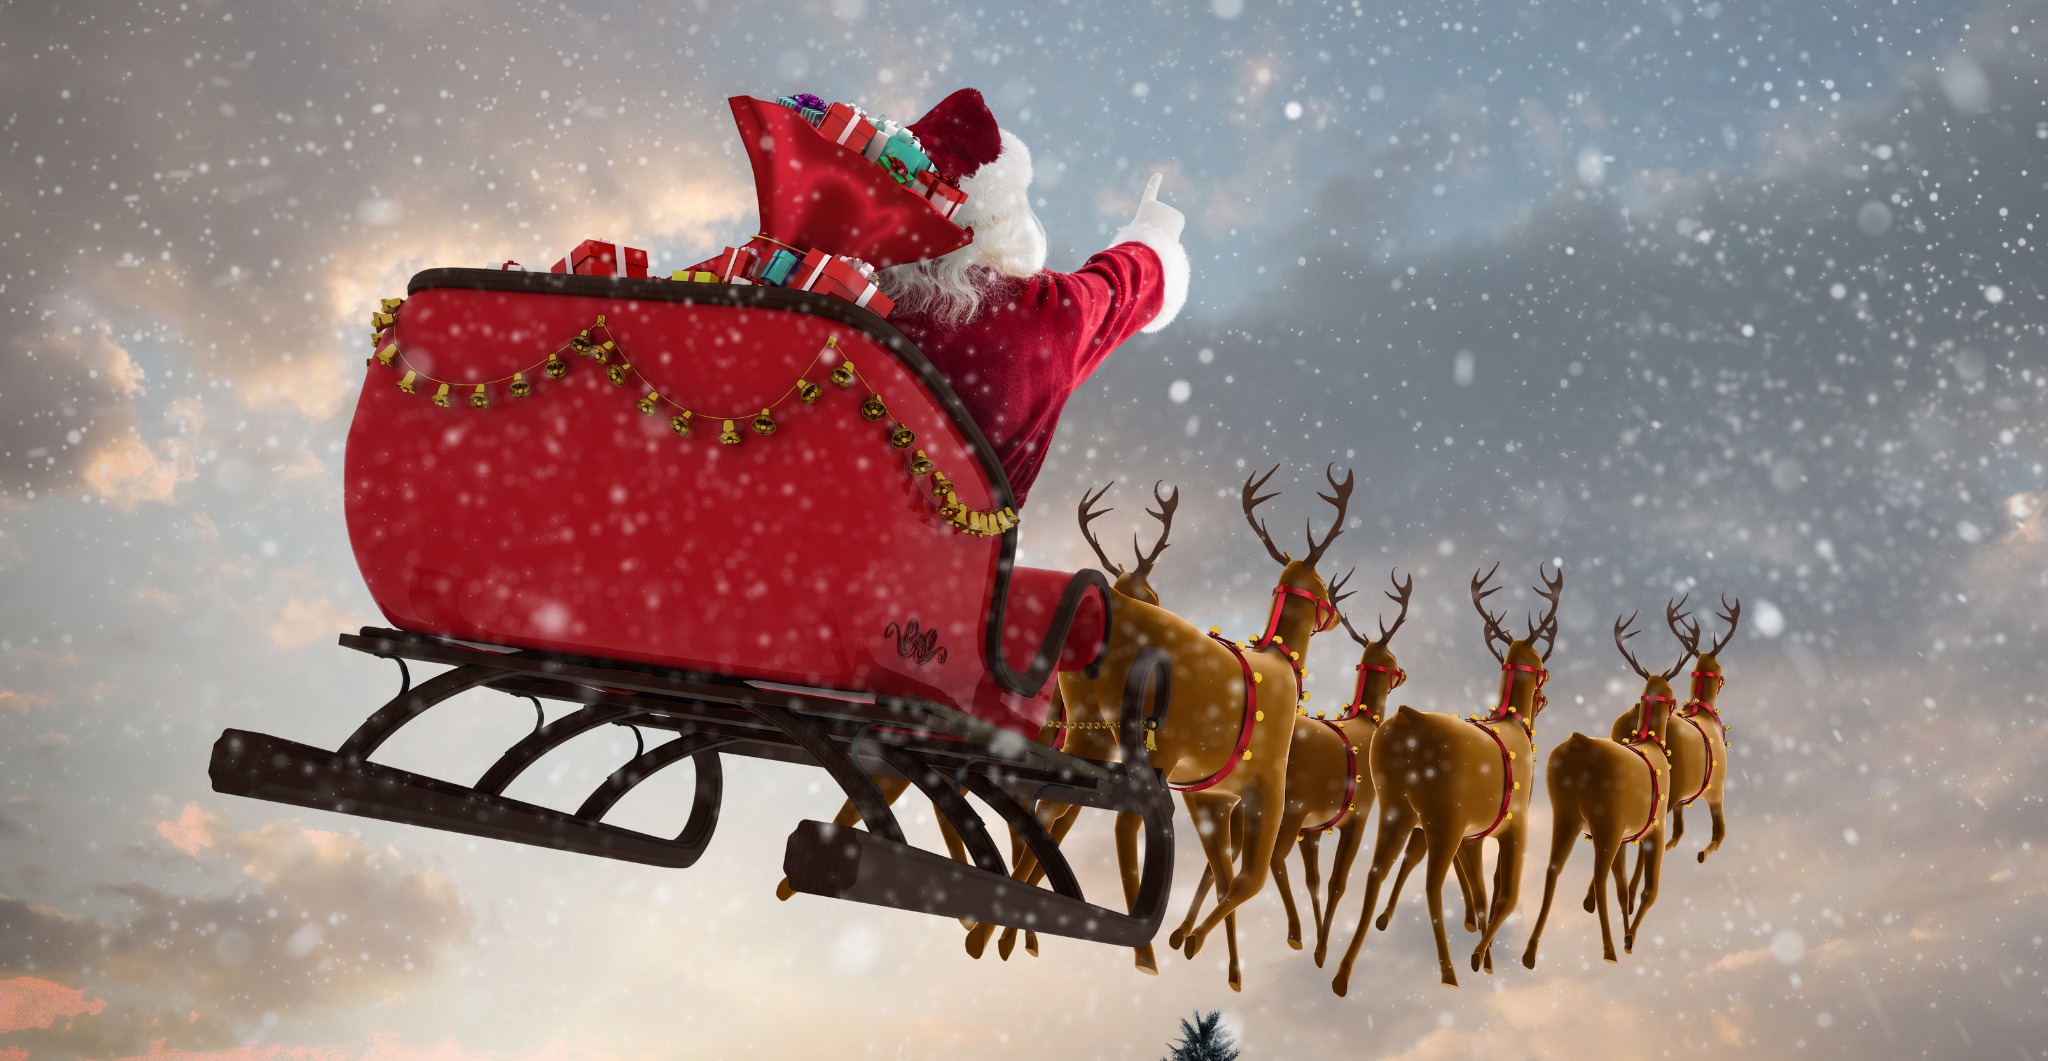 Santa Claus Flying With Reindeer Sleigh And Big Gift Box On Chimney At